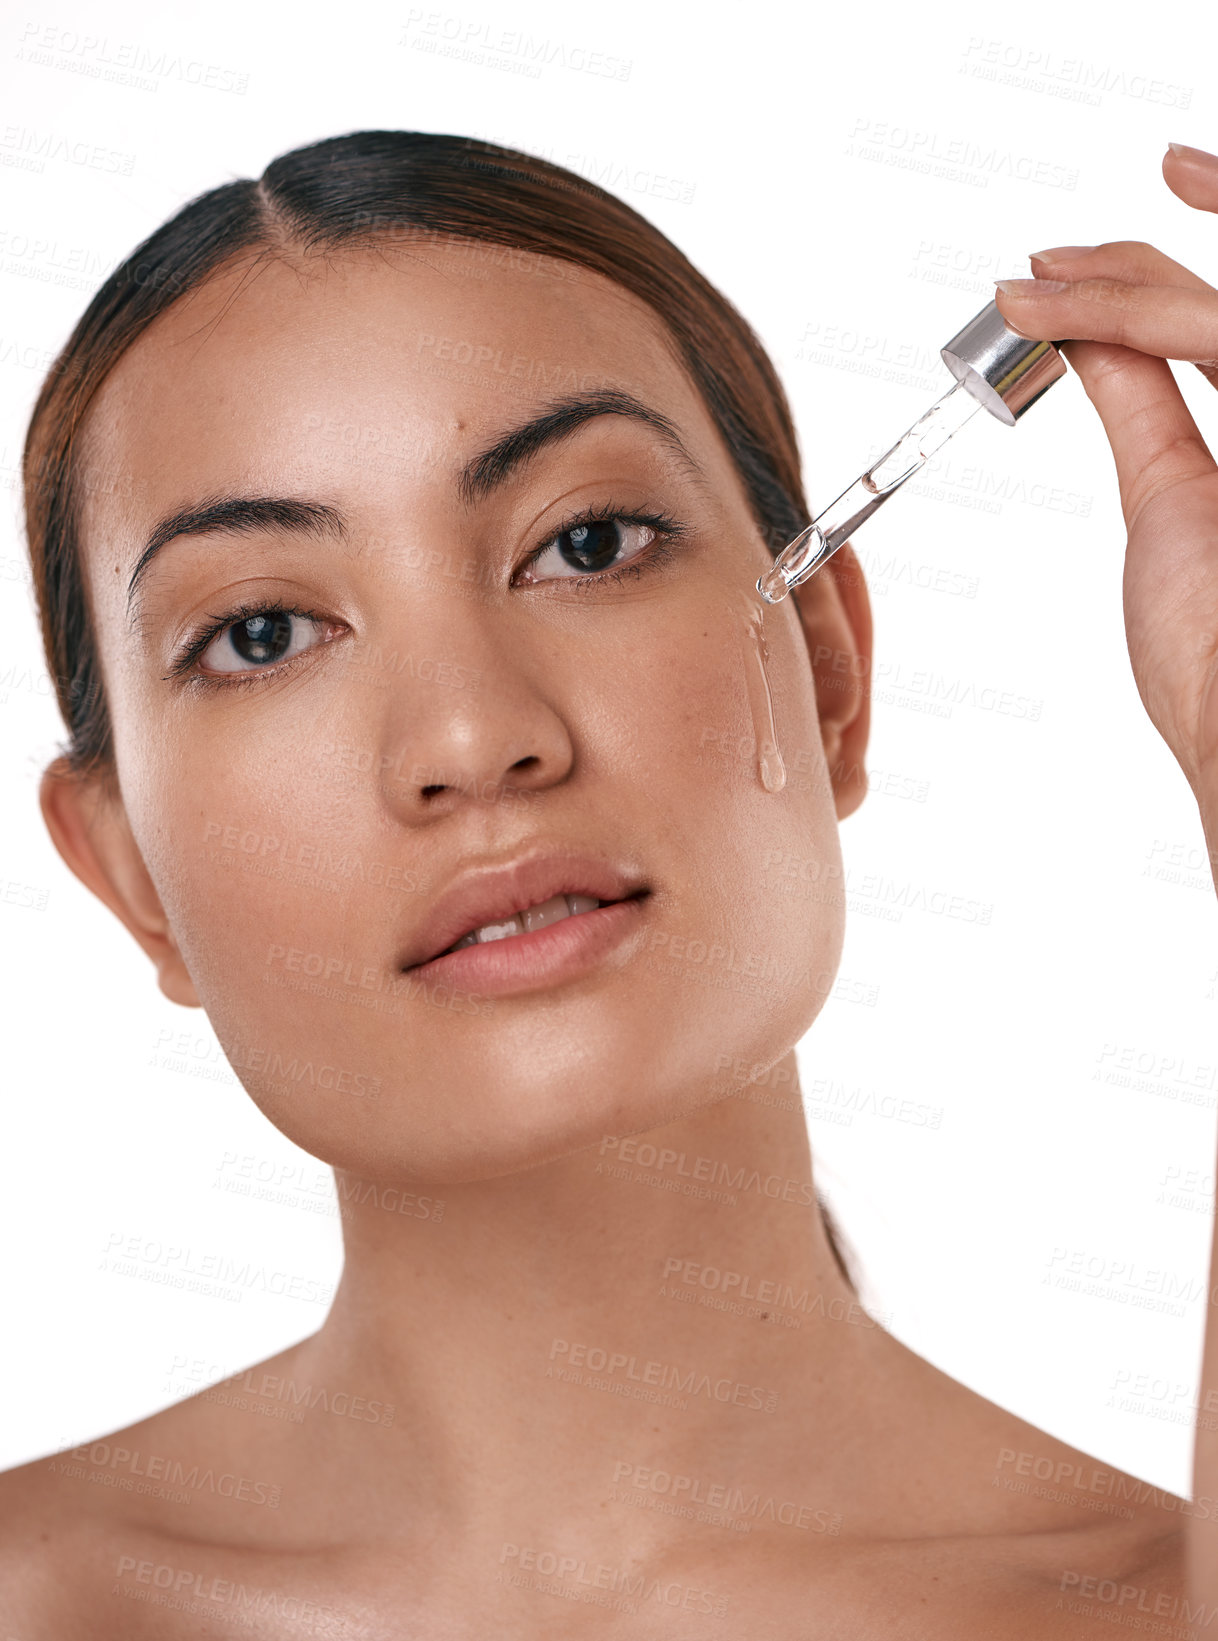 Buy stock photo Shot of a beautiful young woman posing with a serum dropper against her face